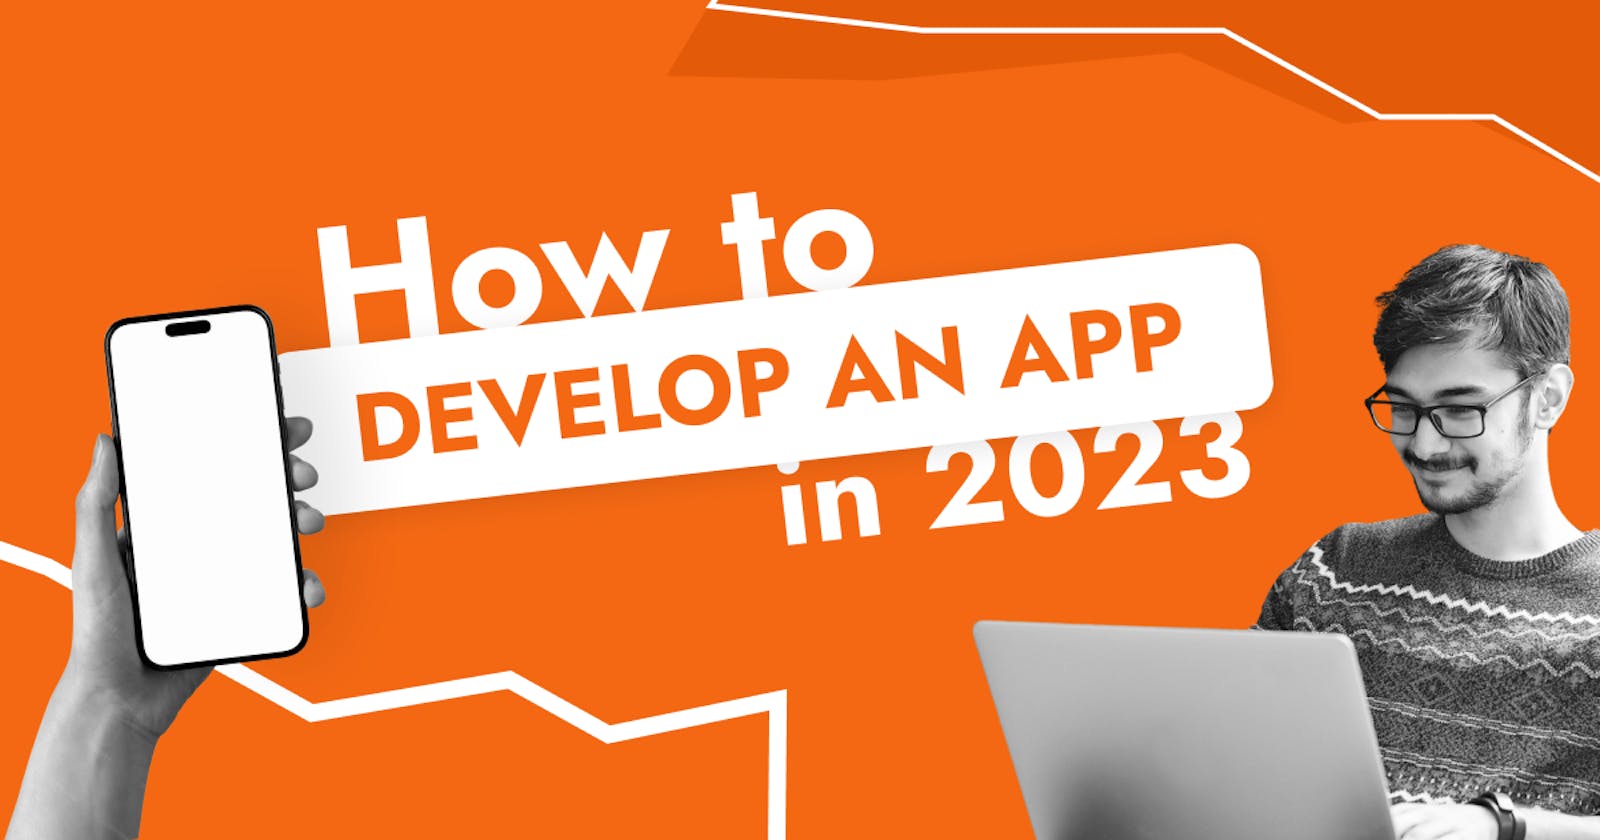 How To Develop An App In 2023: 7 Ways